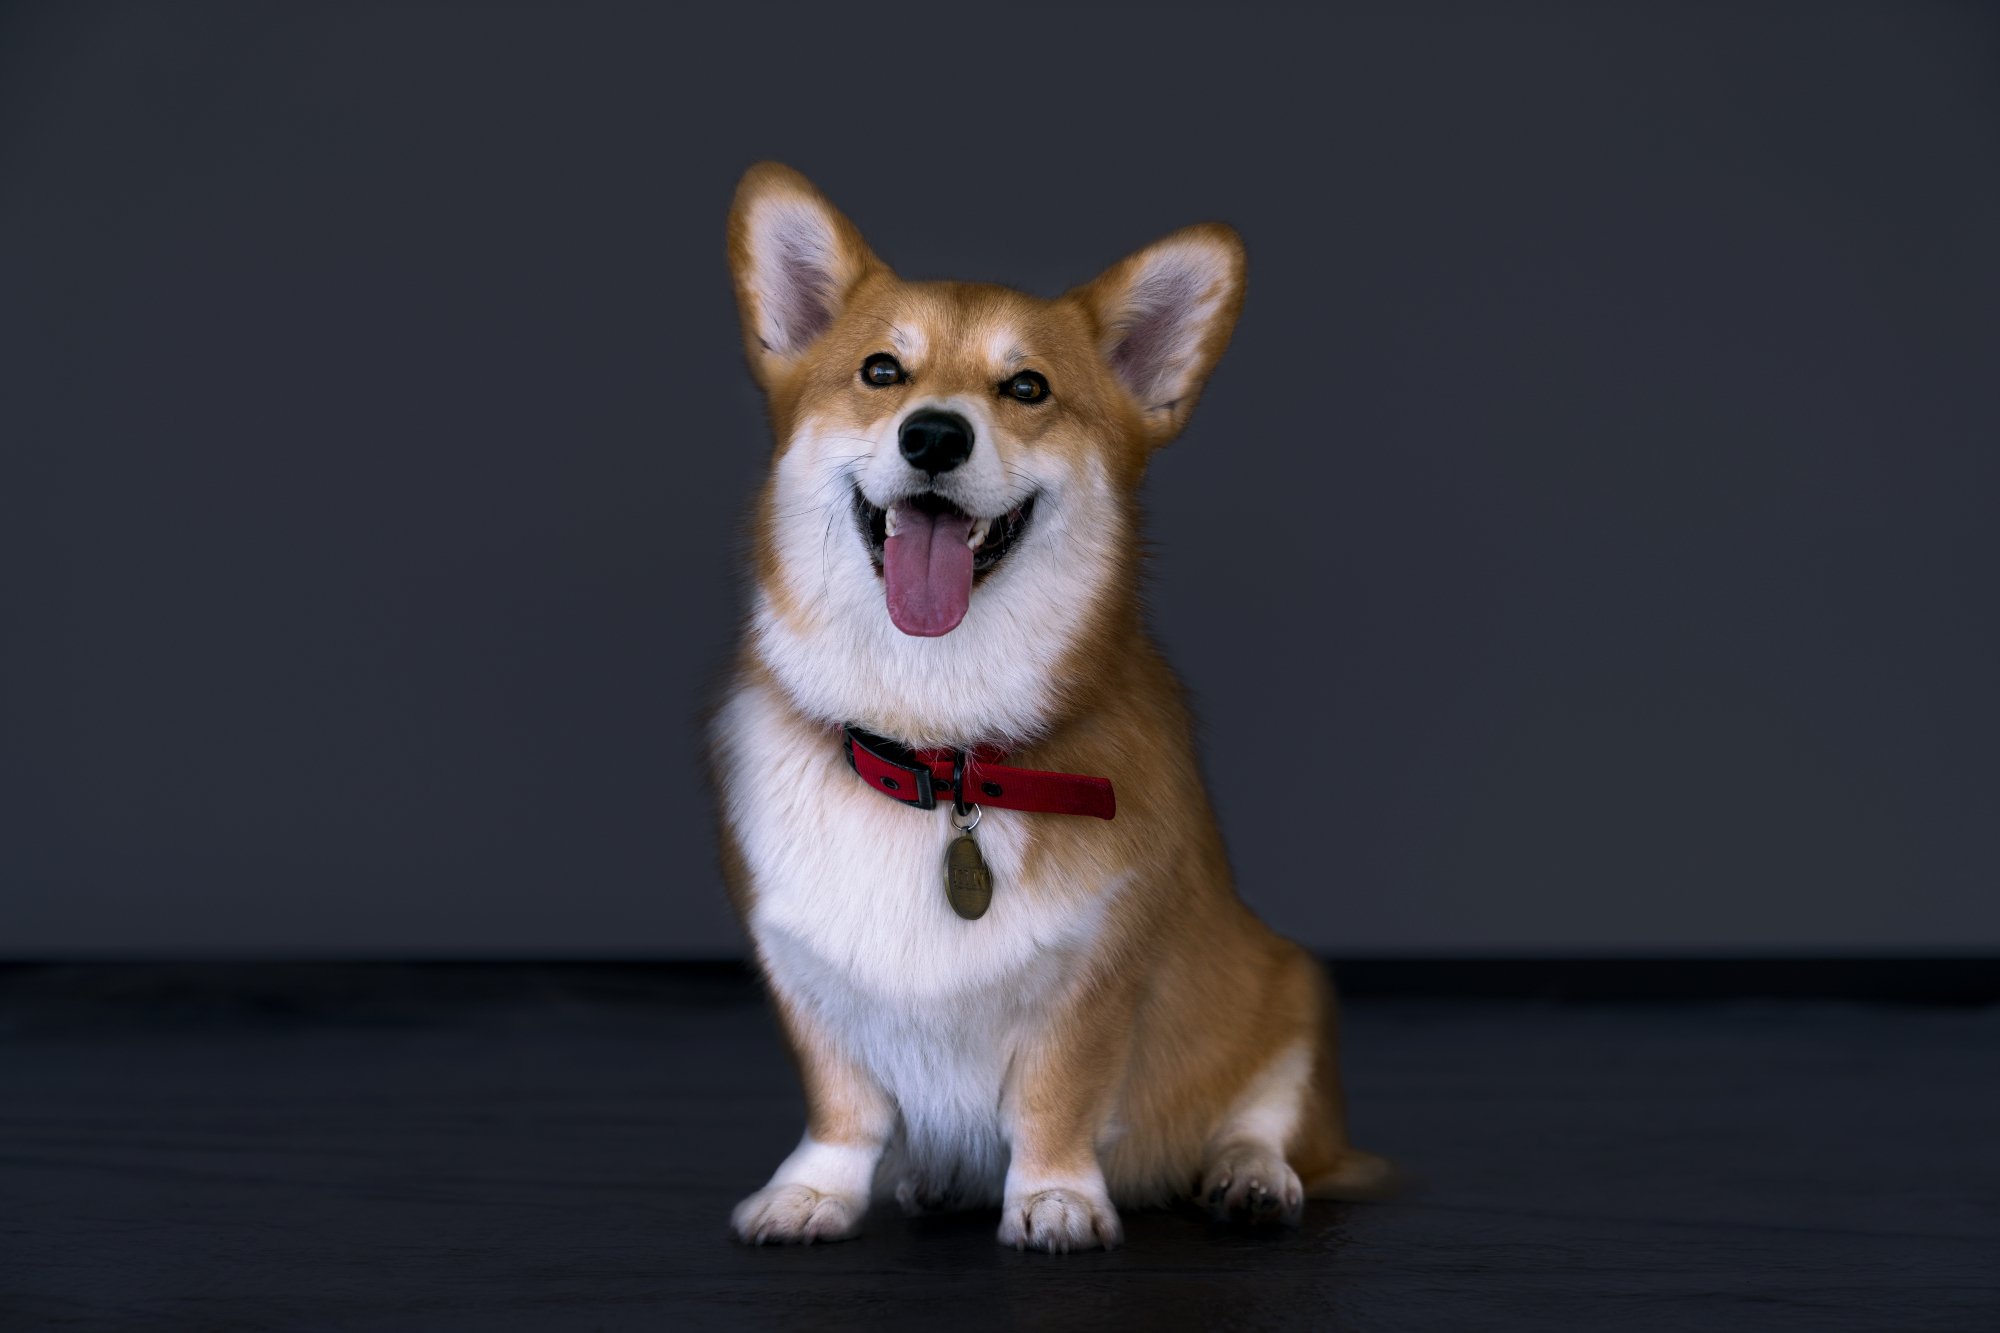 One of the corgis that plays Ein in Netflix's live-action 'Cowboy Bebop'